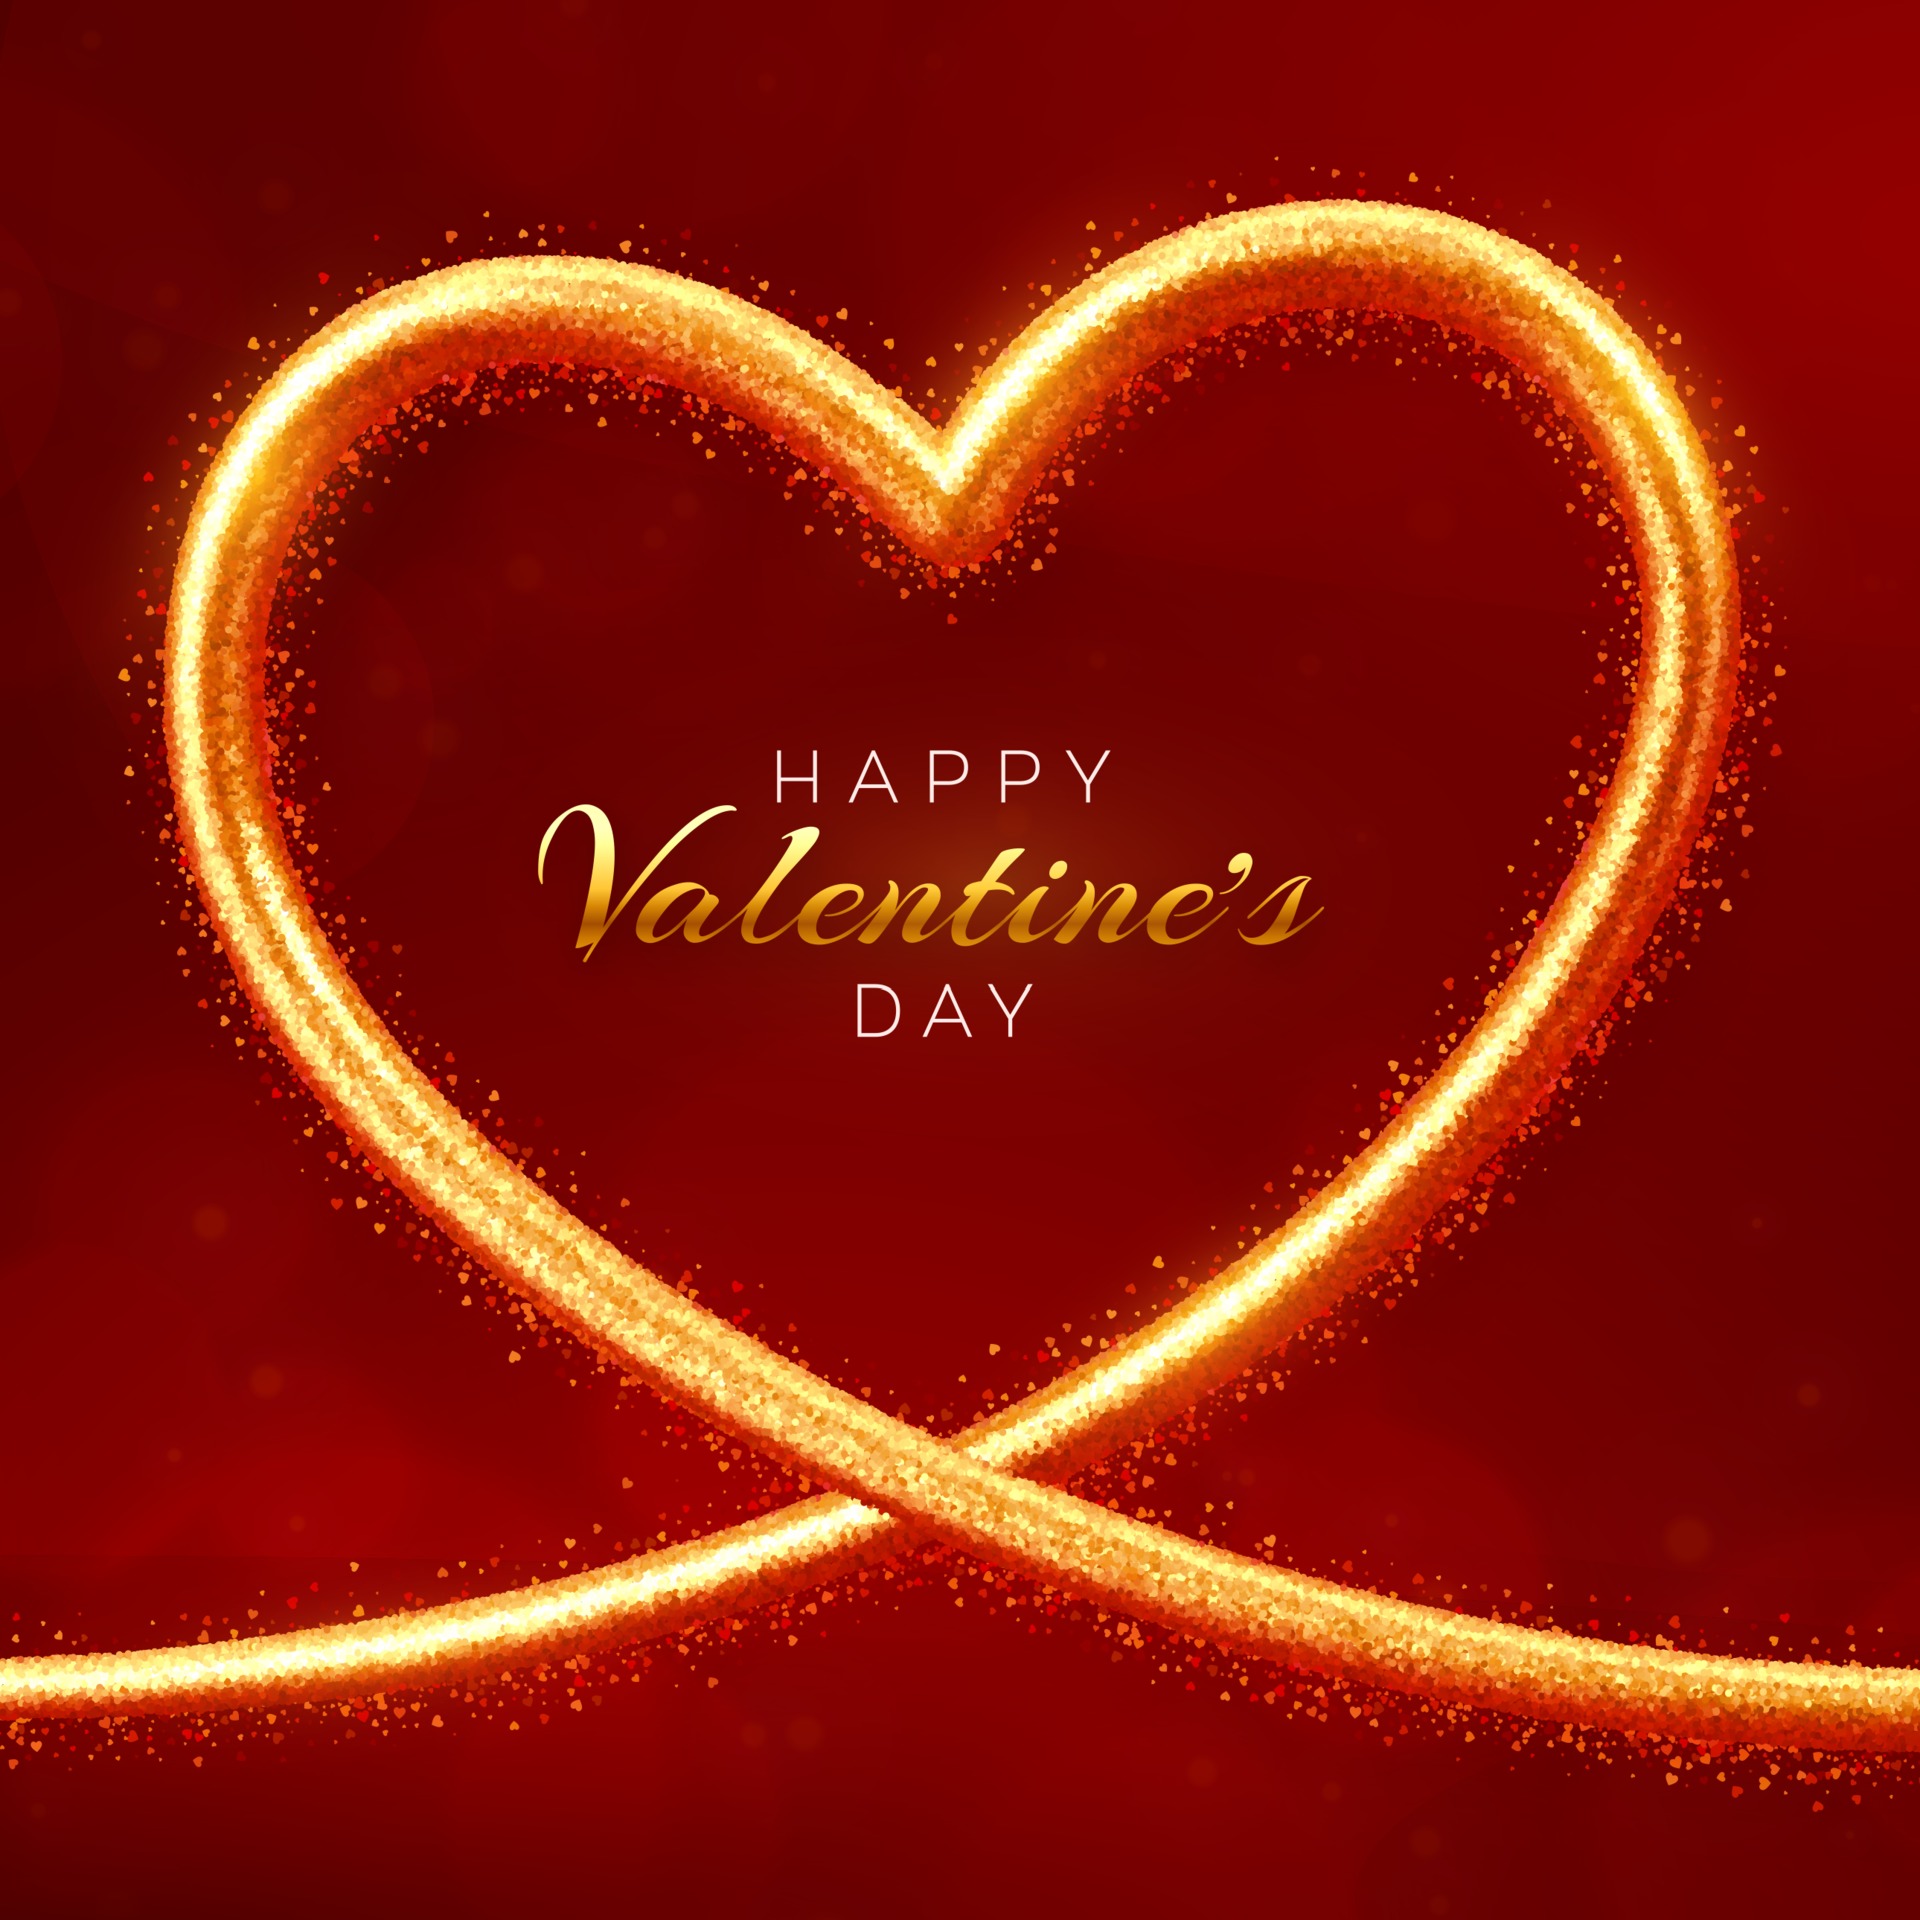 3d Hearts Background Valentines Day Love Wallpaper Wedding Engagement  Datting Romantic Poster Passion Place For Text Paper Frame Stock Photo -  Download Image Now - iStock